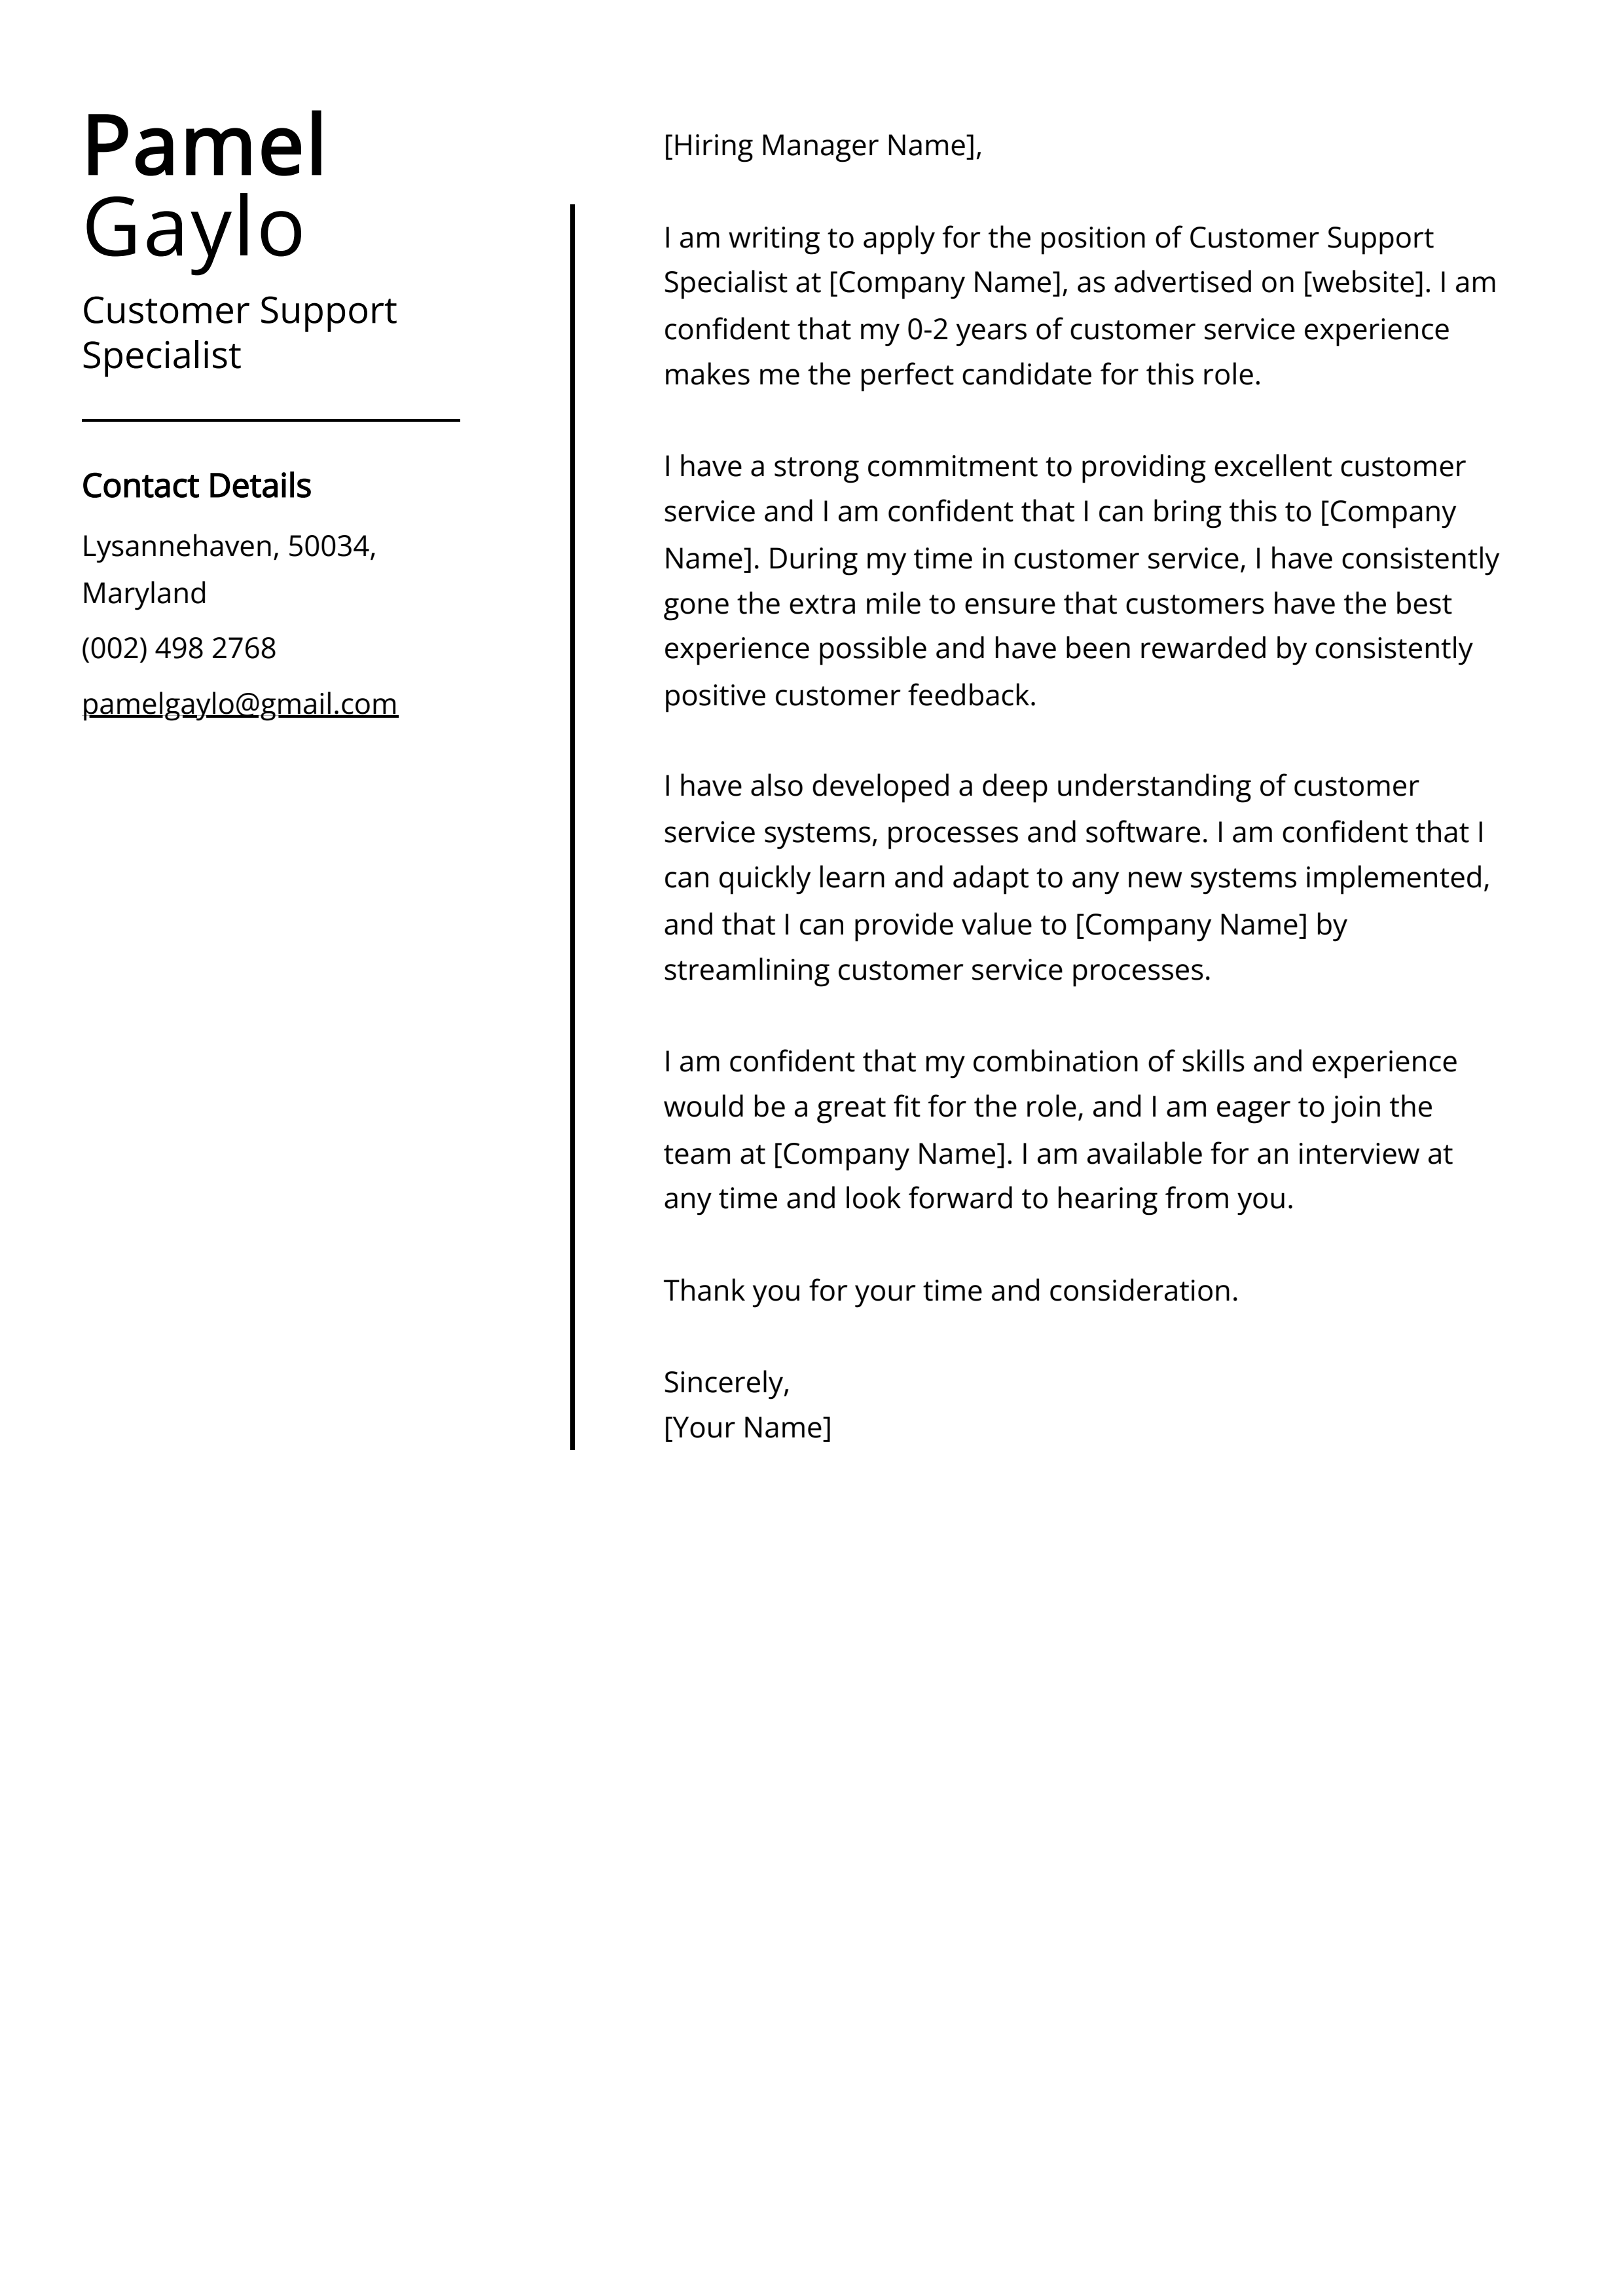 Customer Support Specialist Cover Letter Example